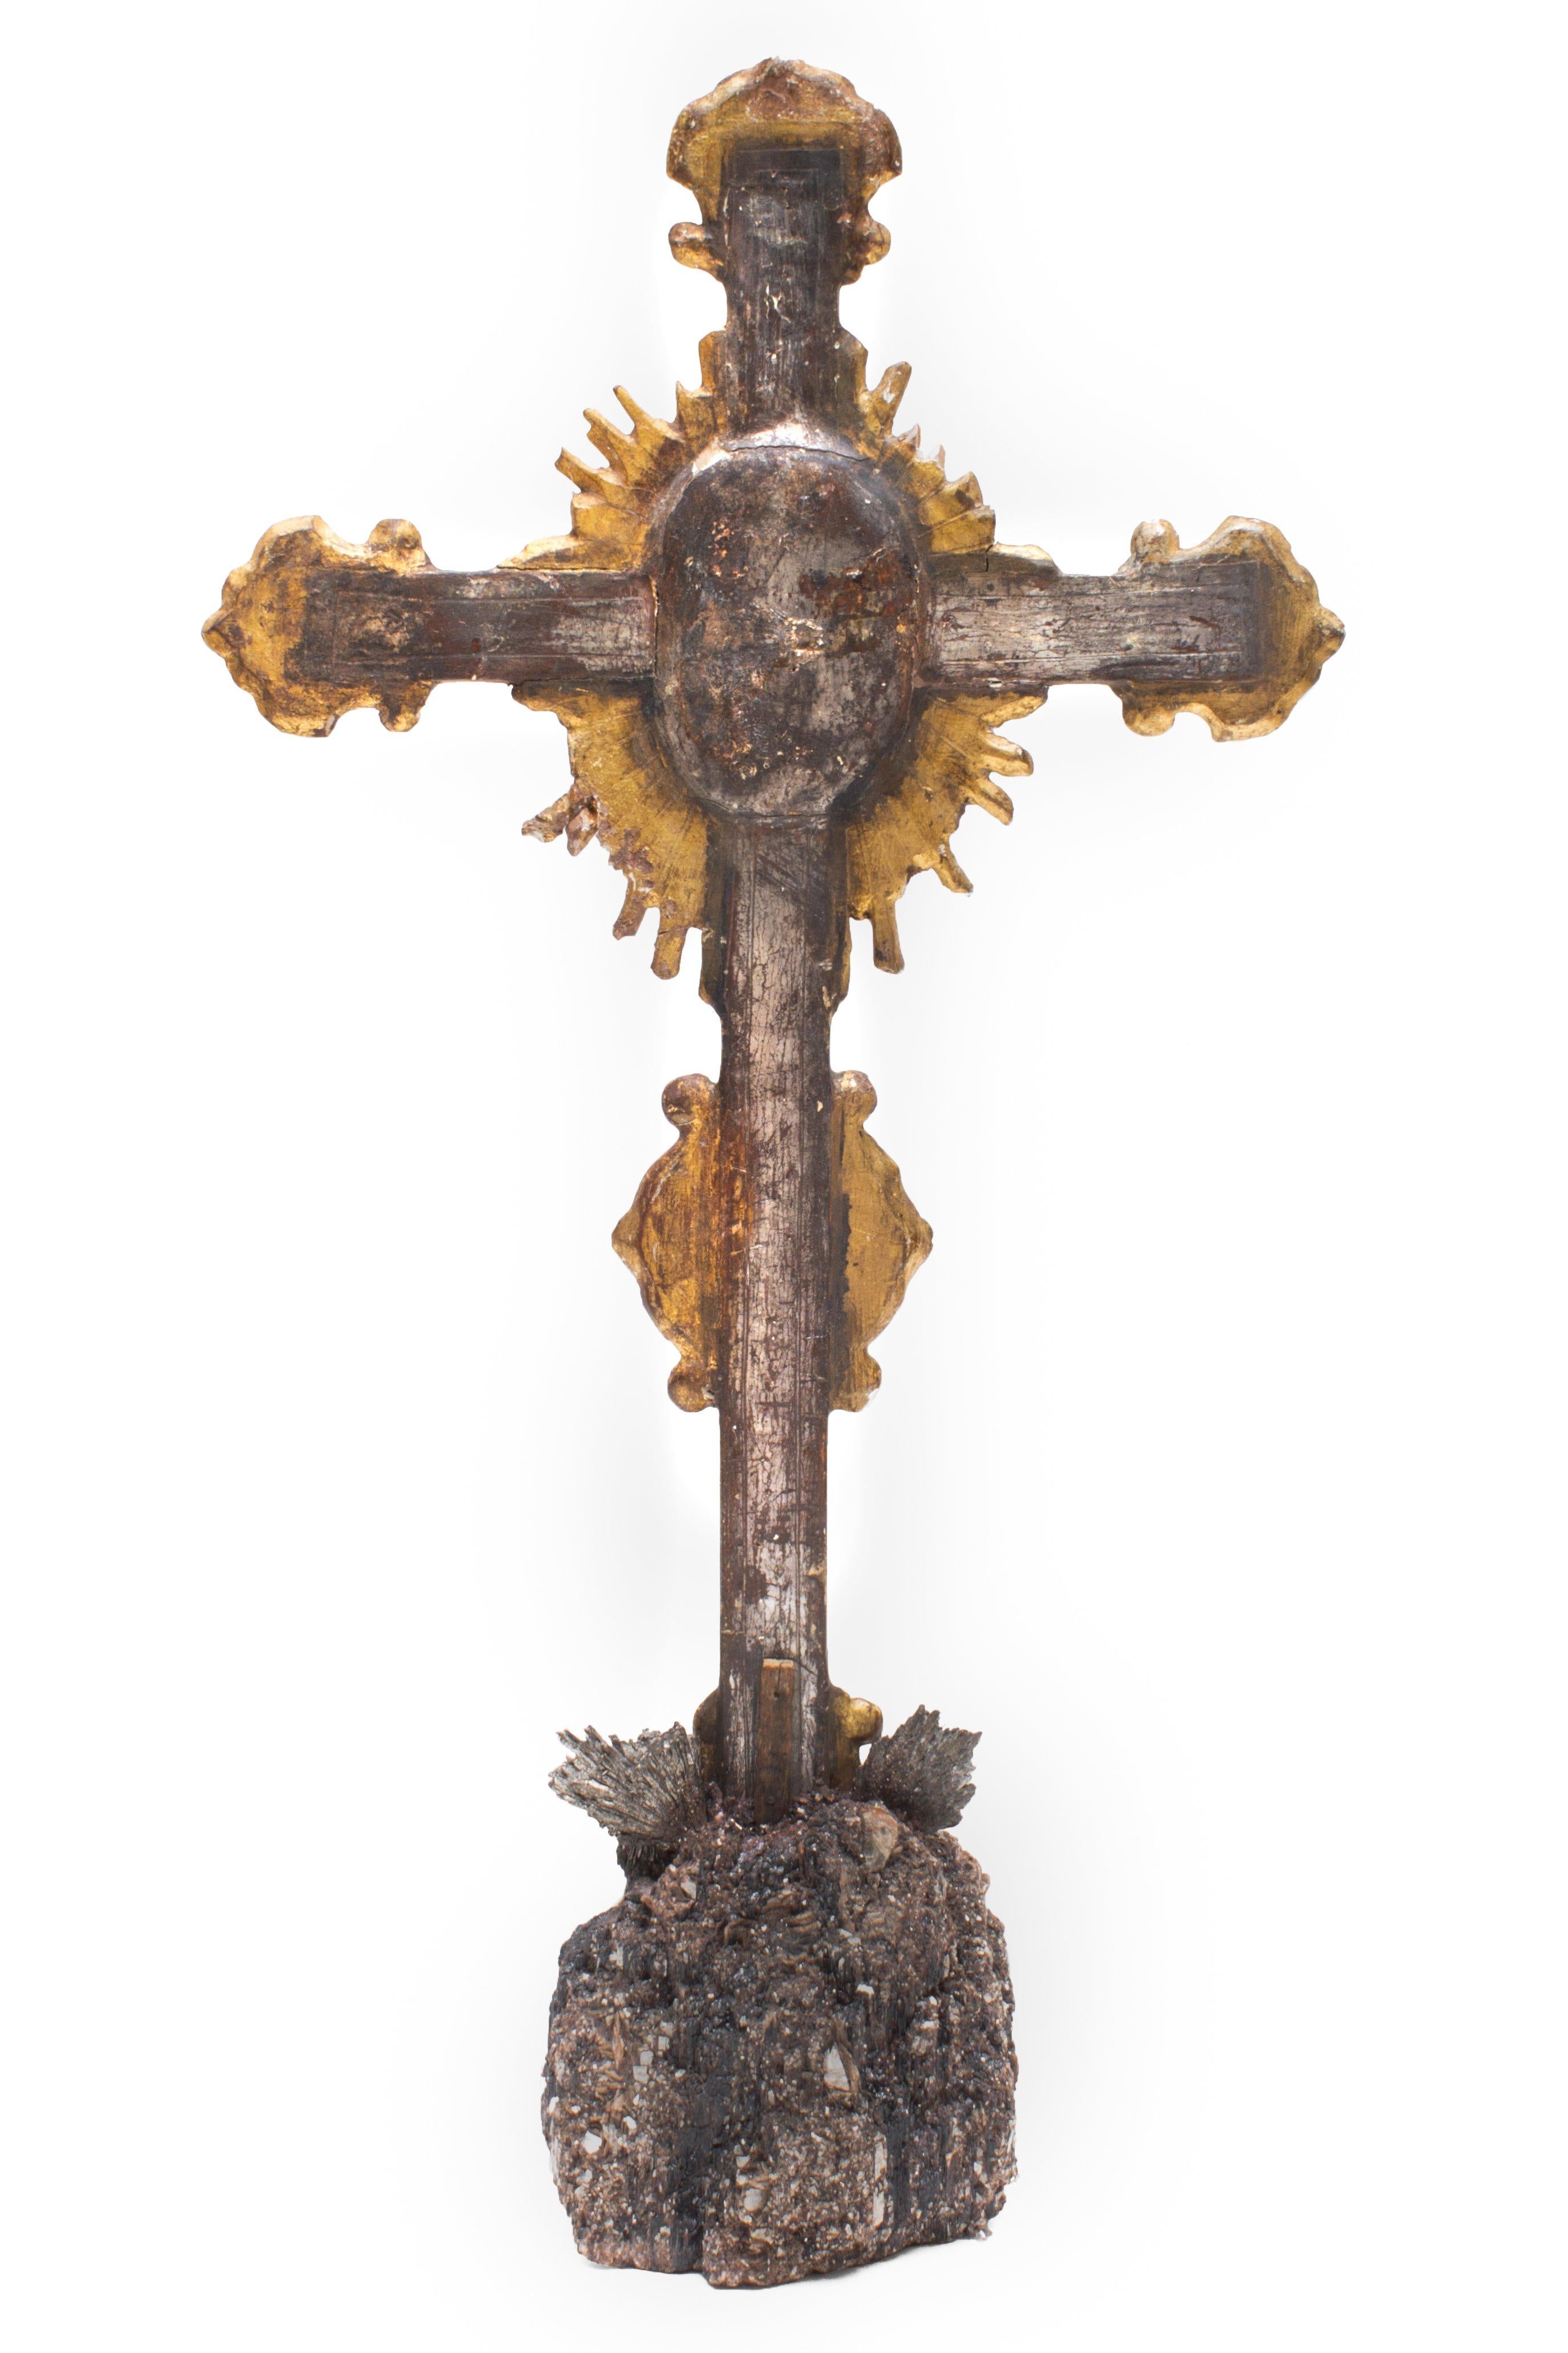 Hand-Carved 18th Century Italian Crucifix on Tourmaline with Mica Inclusions & Kyanite